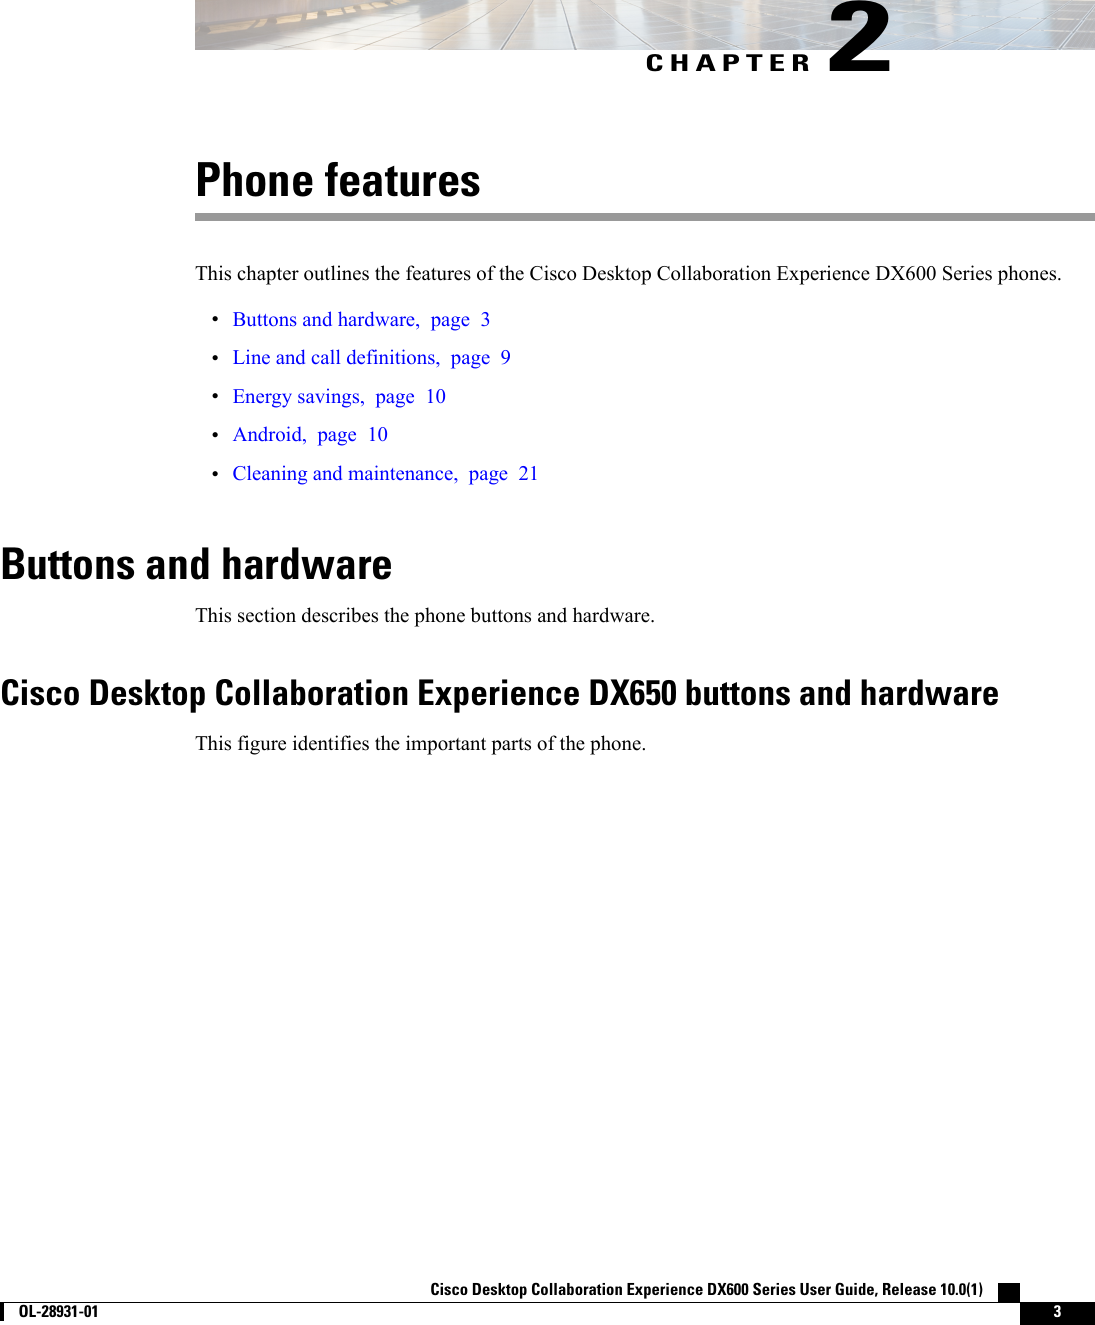 CHAPTER 2Phone featuresThis chapter outlines the features of the Cisco Desktop Collaboration Experience DX600 Series phones.•Buttons and hardware, page 3•Line and call definitions, page 9•Energy savings, page 10•Android, page 10•Cleaning and maintenance, page 21Buttons and hardwareThis section describes the phone buttons and hardware.Cisco Desktop Collaboration Experience DX650 buttons and hardwareThis figure identifies the important parts of the phone.Cisco Desktop Collaboration Experience DX600 Series User Guide, Release 10.0(1)        OL-28931-01 3